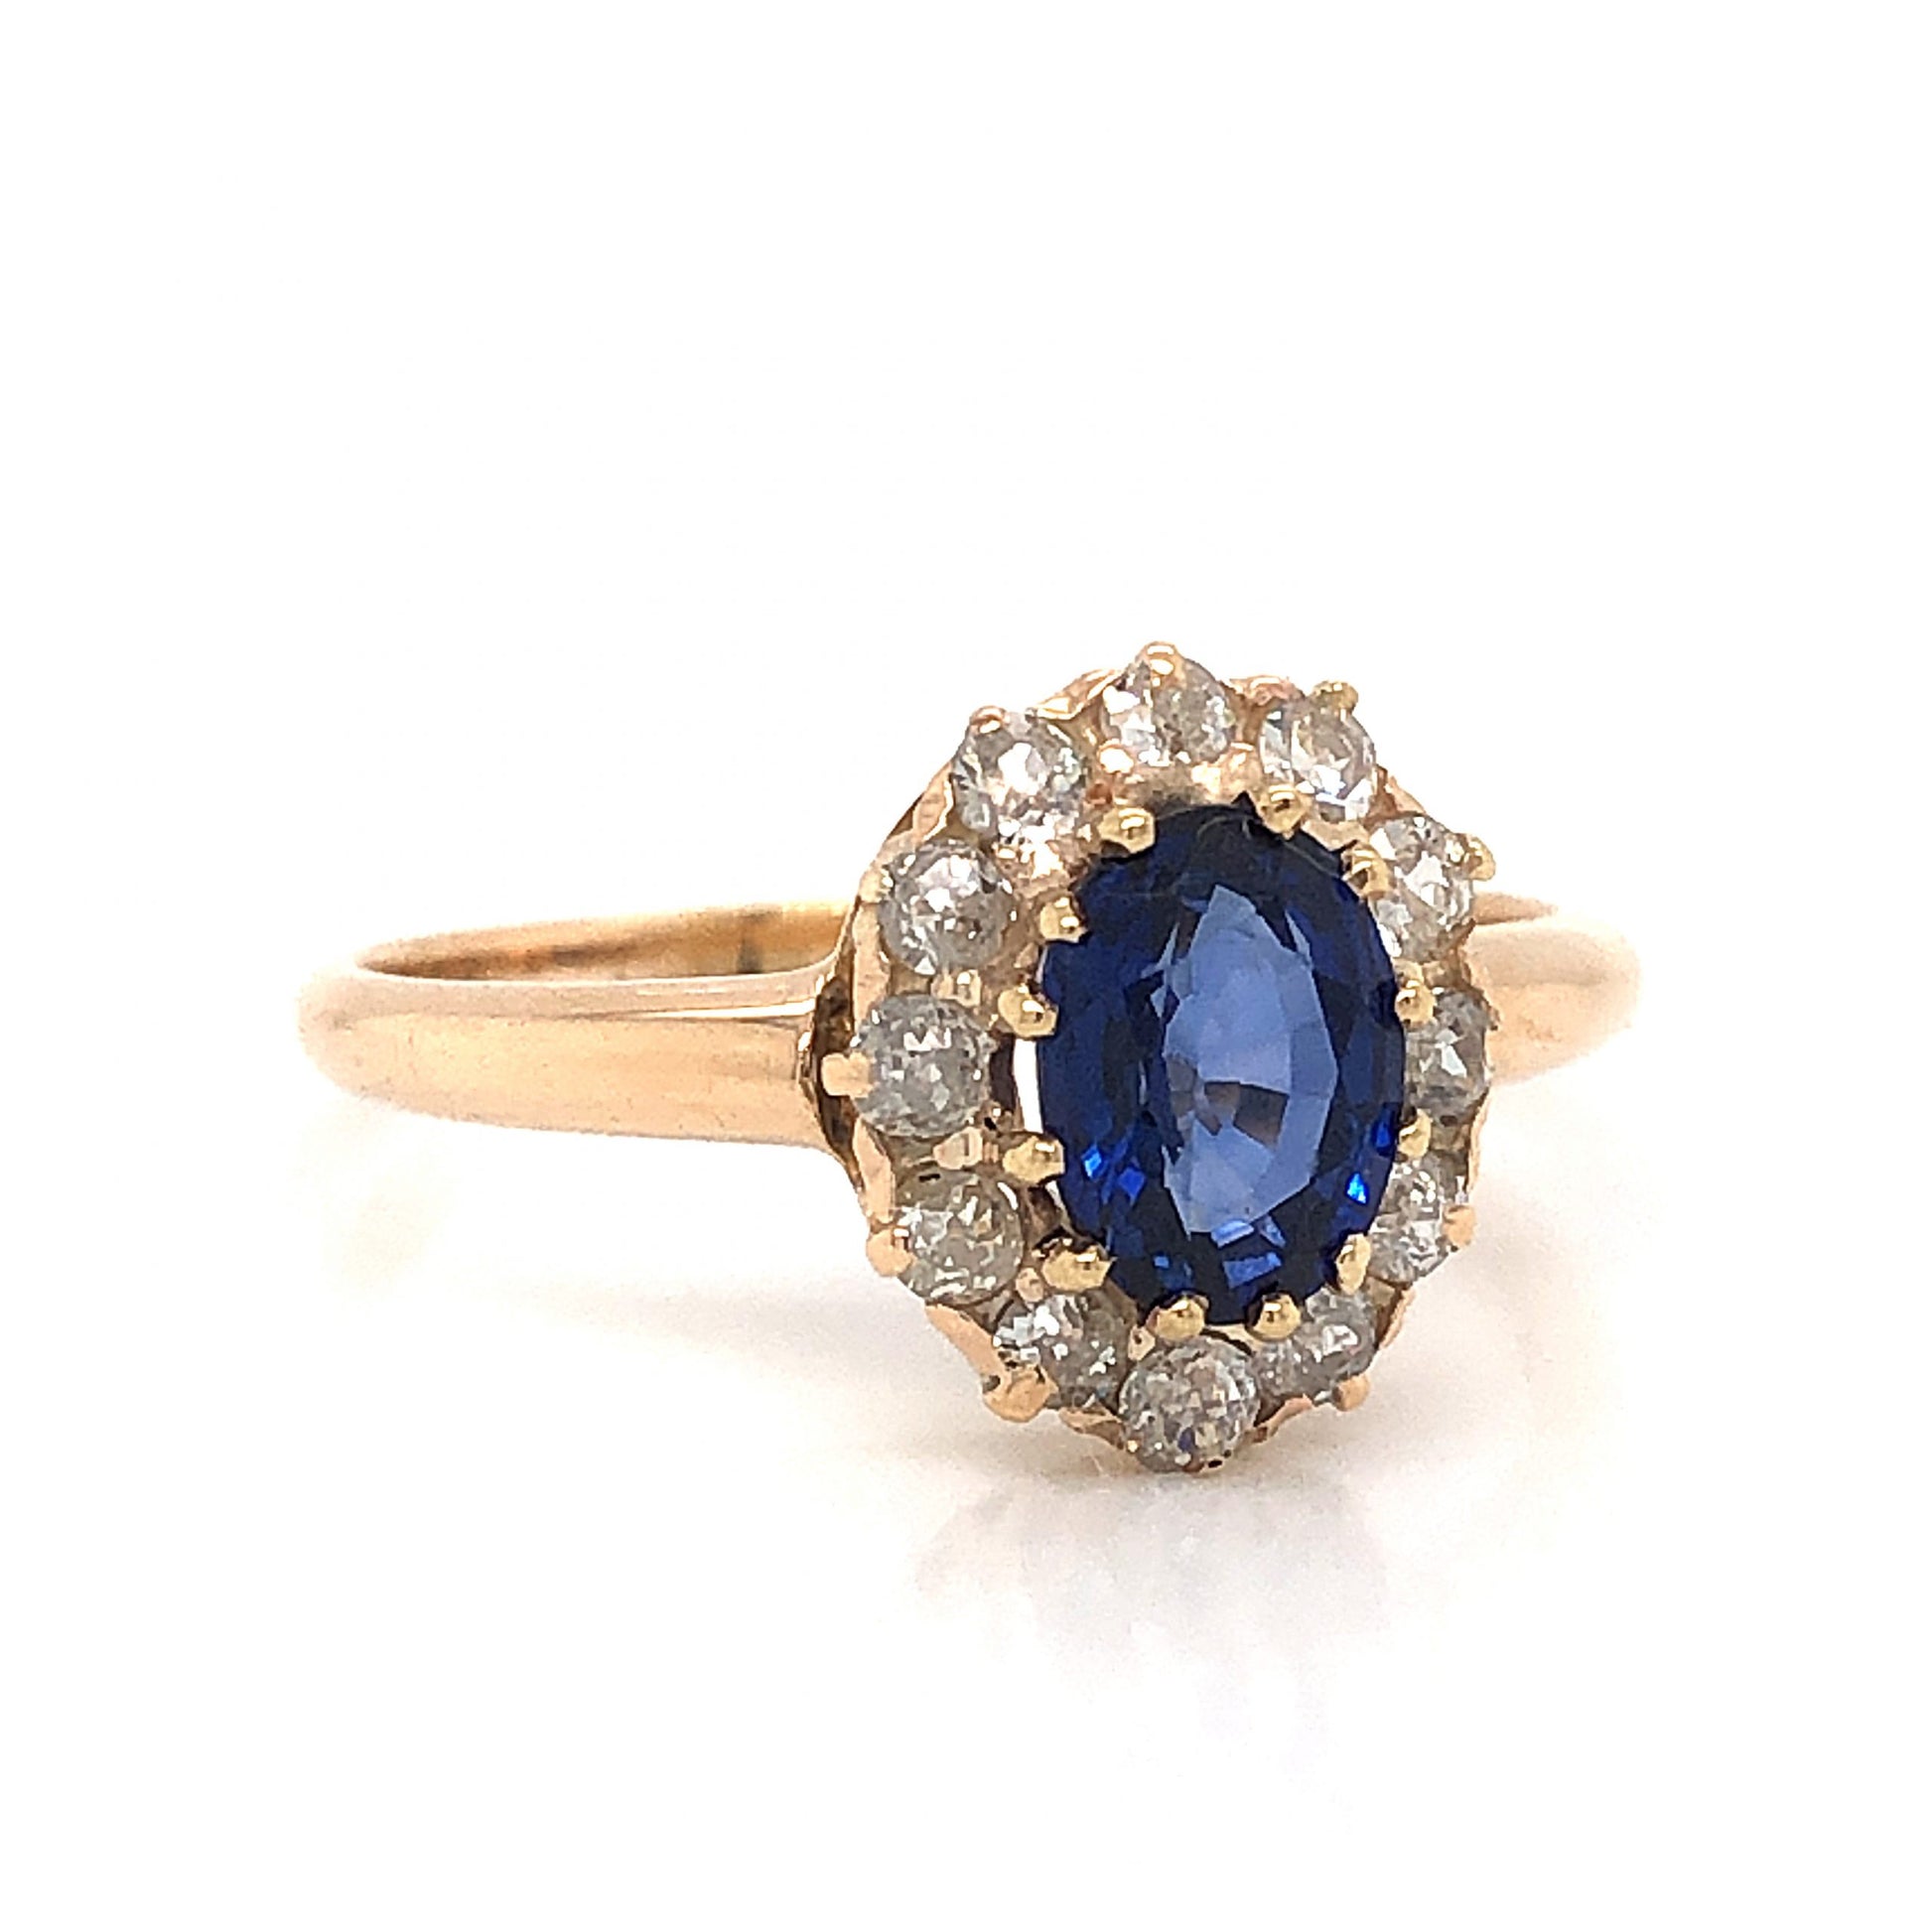 Victorian Oval Sapphire & Diamond Engagement Ring in 14k Yellow GoldComposition: 14 Karat Yellow GoldRing Size: 7.5Total Diamond Weight: .36 ctTotal Gram Weight: 2.3 gInscription: 14k